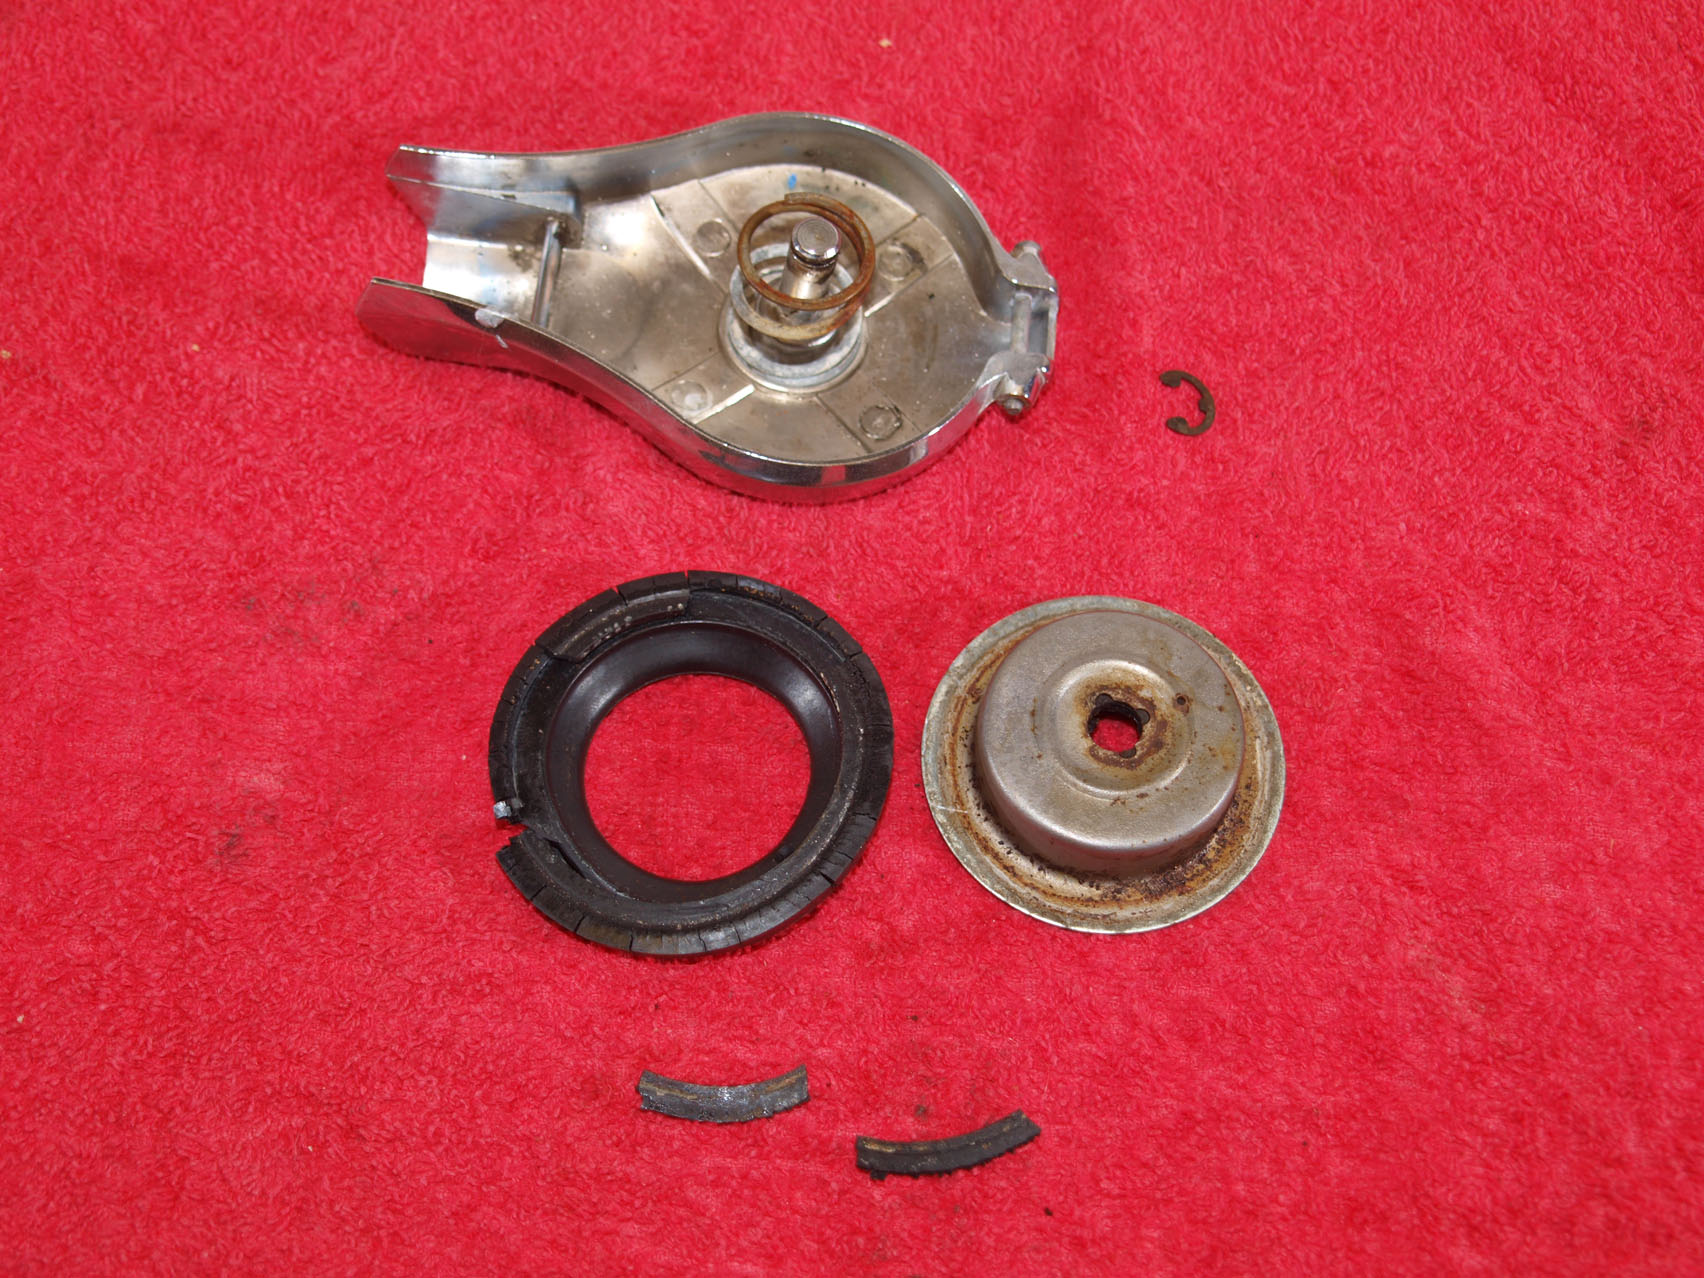 Damaged rubber gasket and fuel cap parts